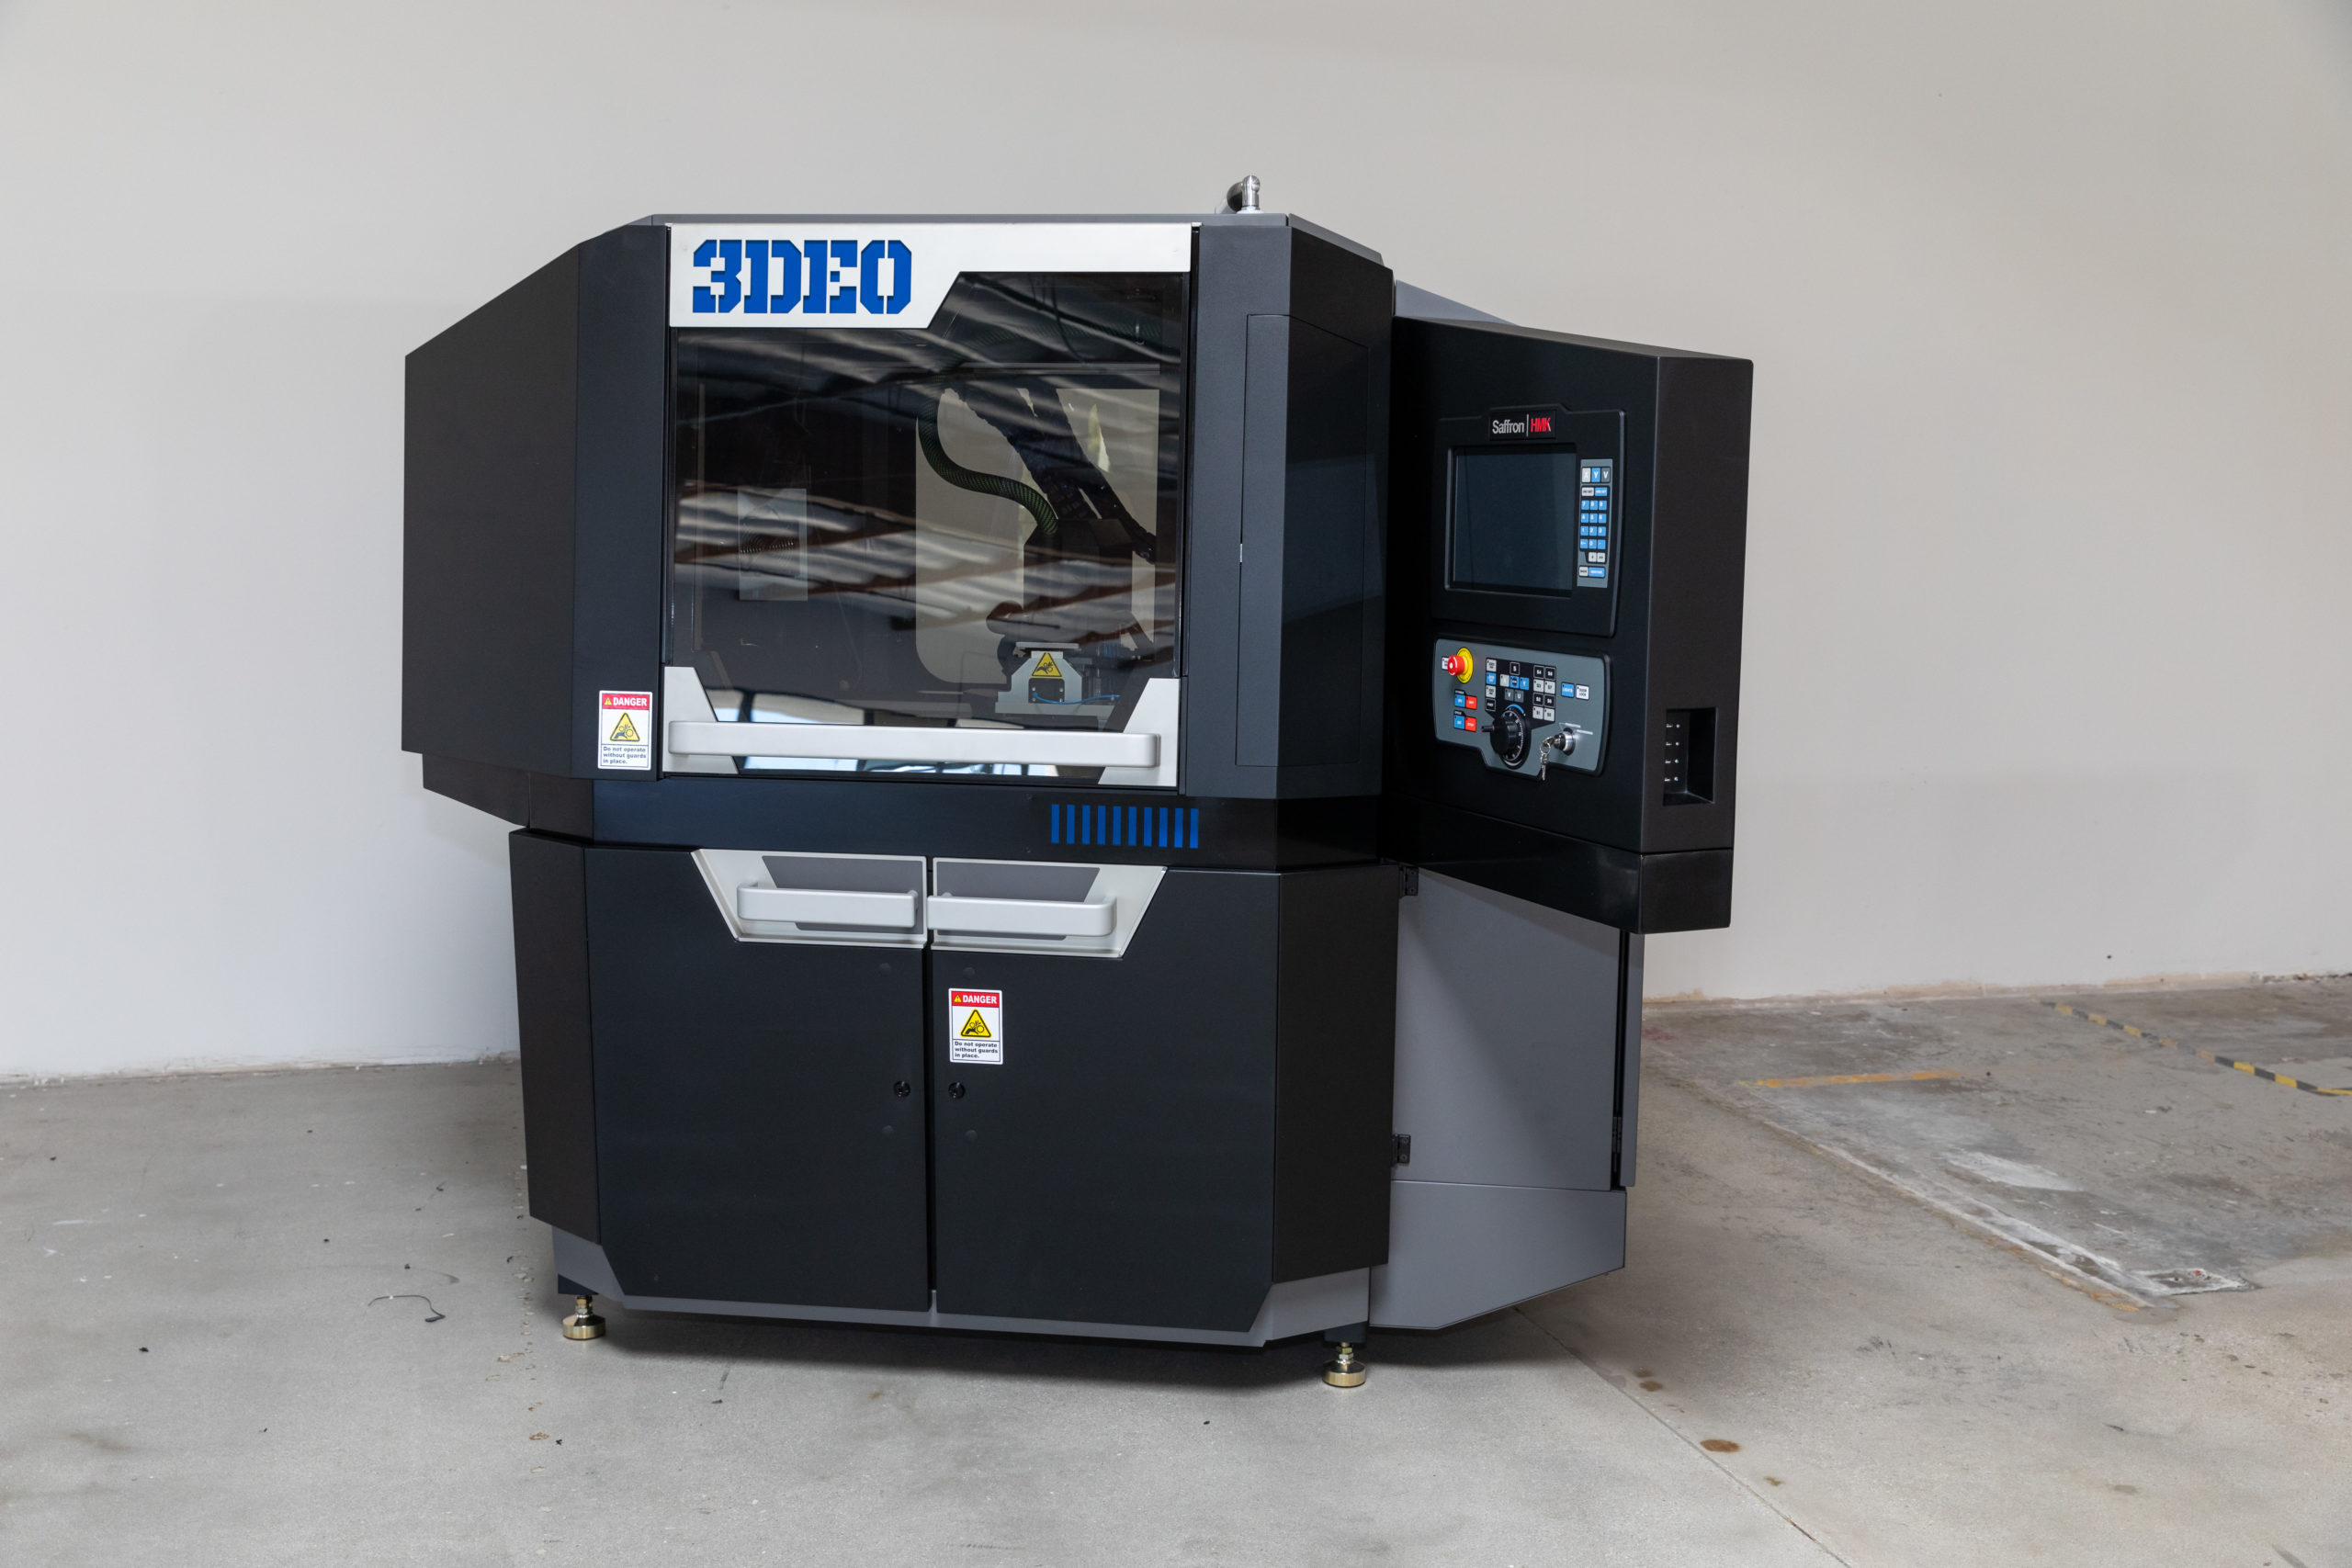 A 3deo metal 3d printer inside a clean industrial setting, featuring a prominent display panel and sleek black and blue design.